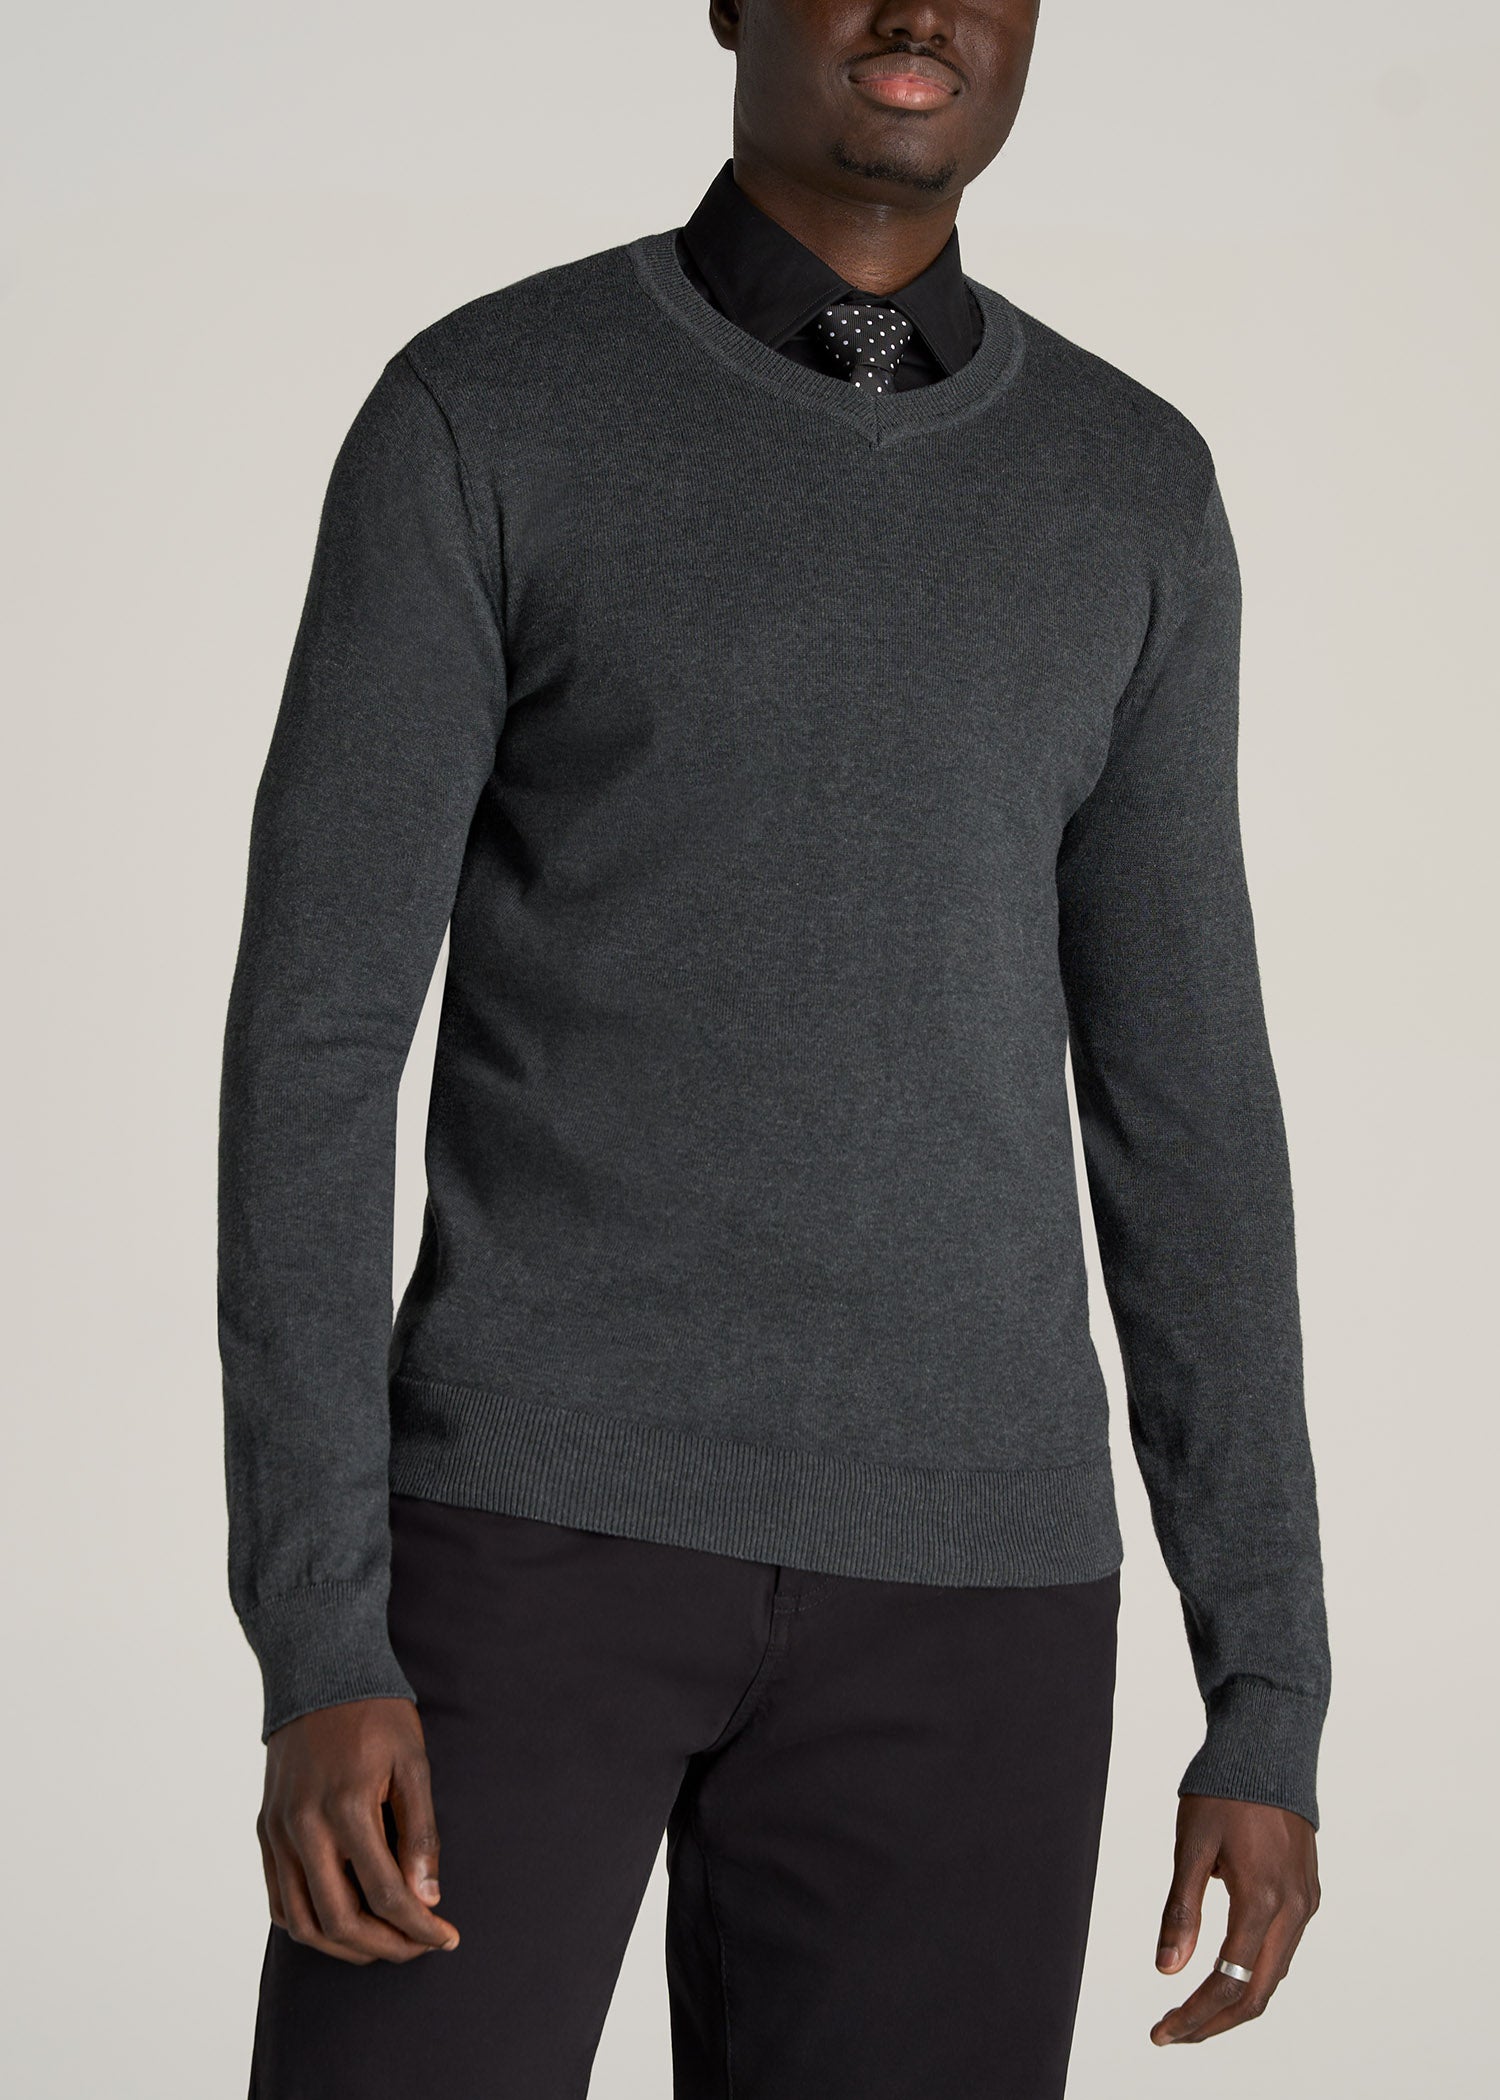 Men's Tall Everyday V-Neck Sweater Charcoal Mix | American Tall